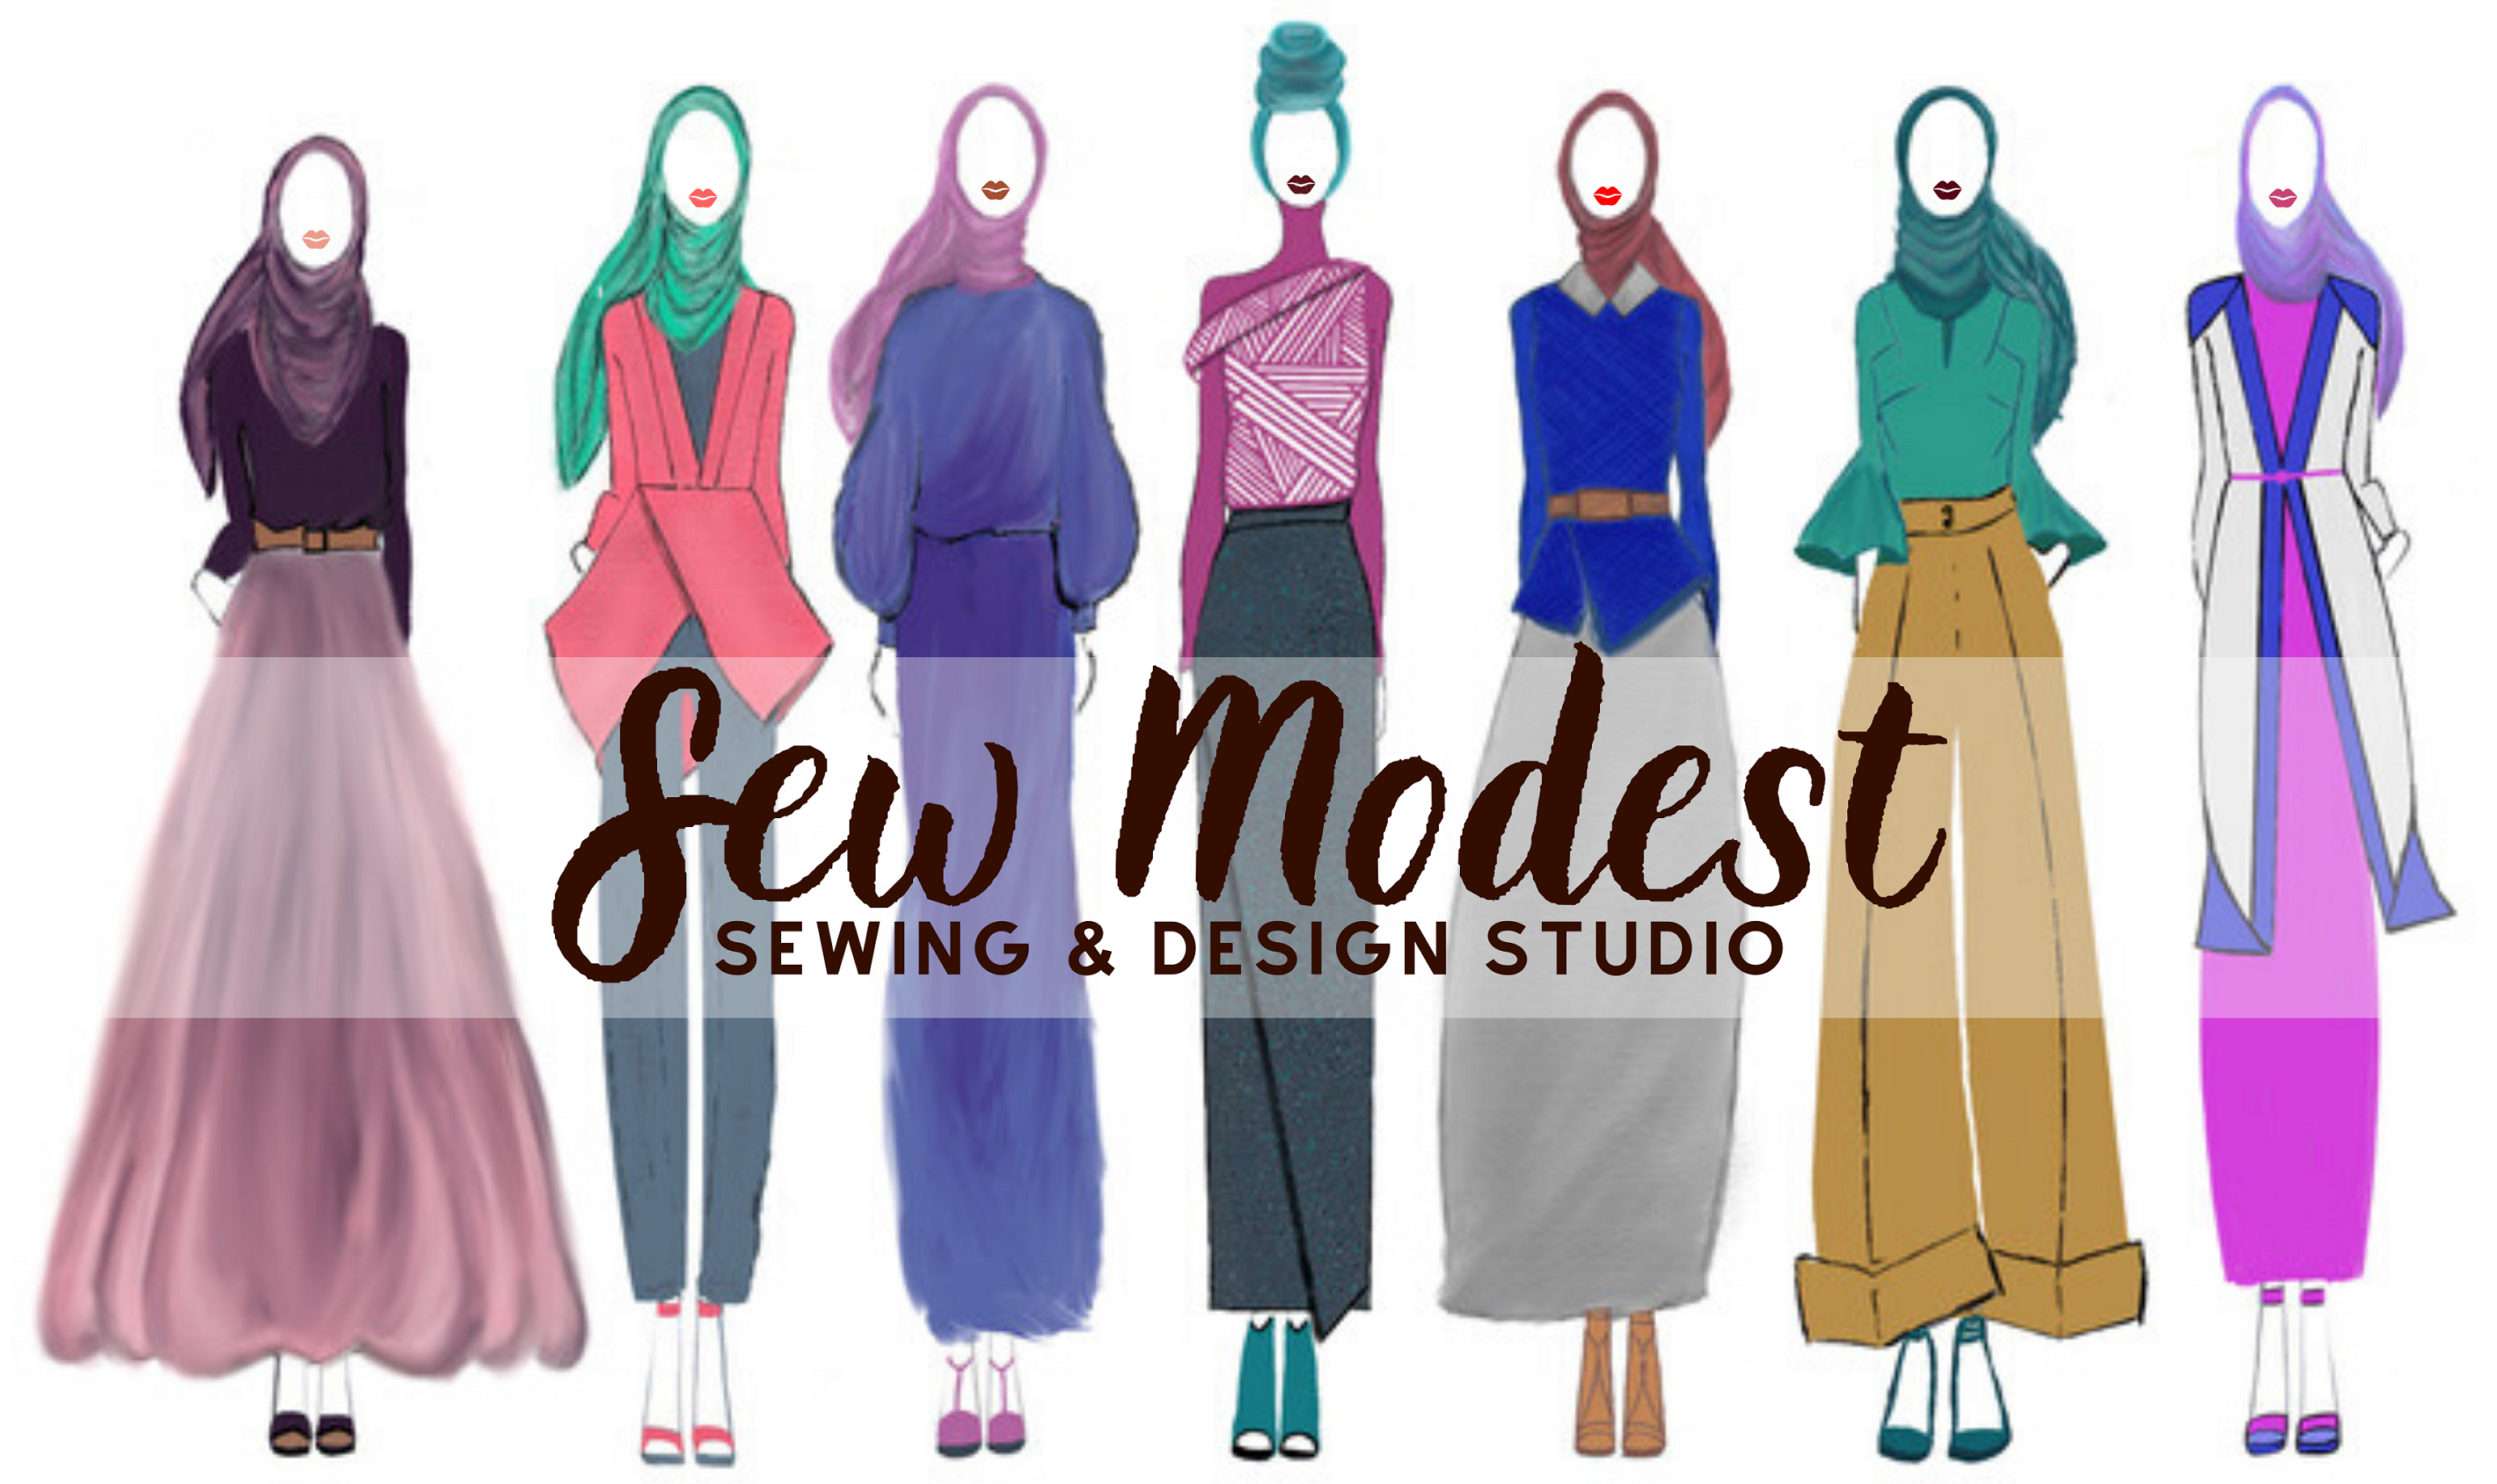 Week Introductory course @ Sew Modest Sewing and Design Studio